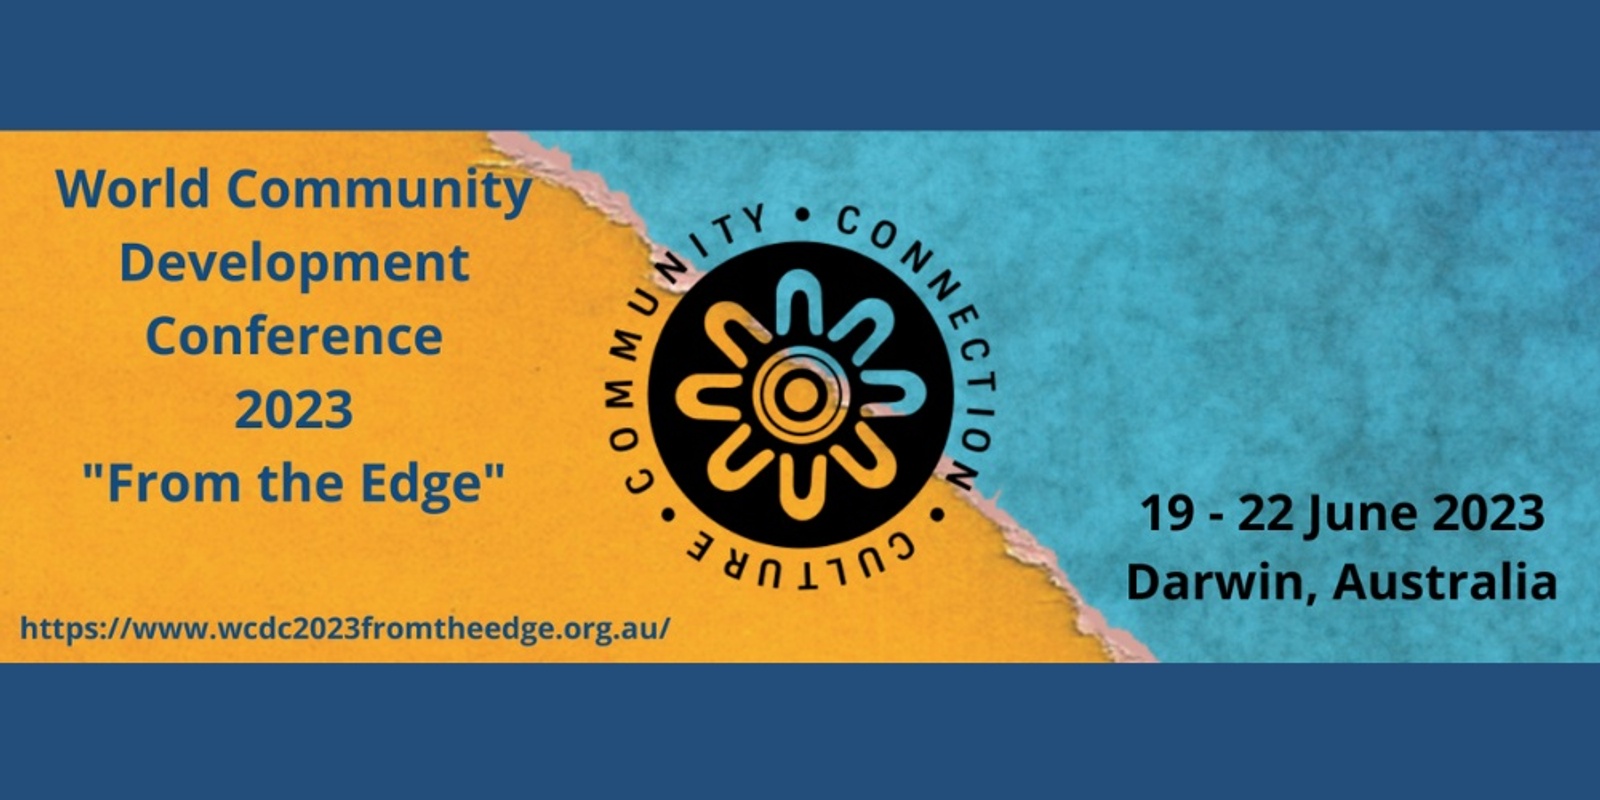 2023 World Community Development Conference "From the Edge" Darwin